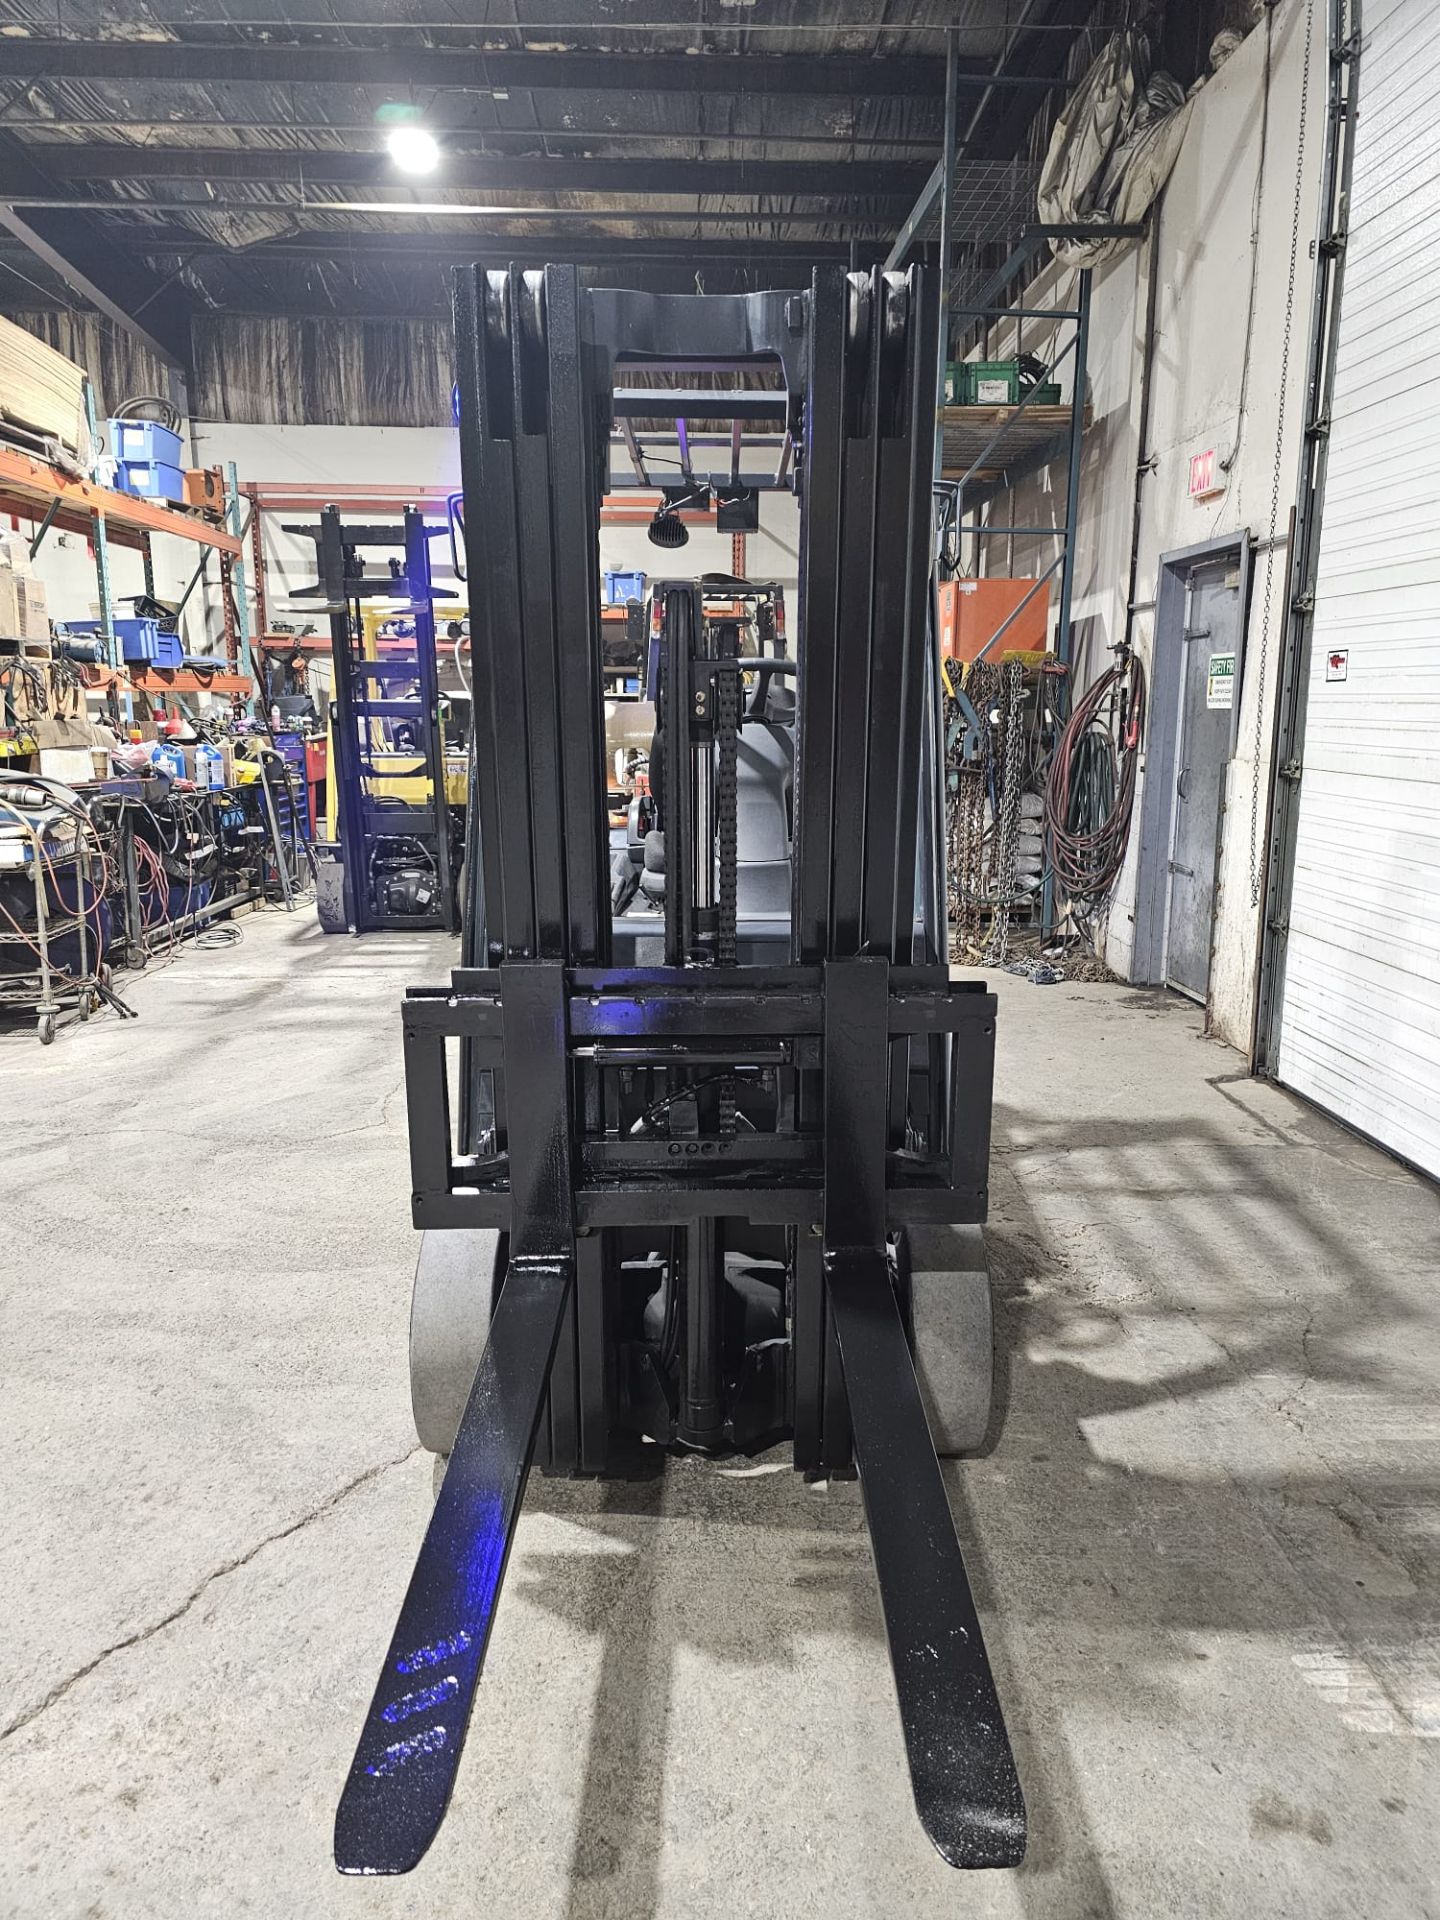 2015 DOOSAN 5,000lbs Capacity LPG (Propane) Forklift with sideshift 3-STAGE MAST with 189" LOAD - Image 5 of 5